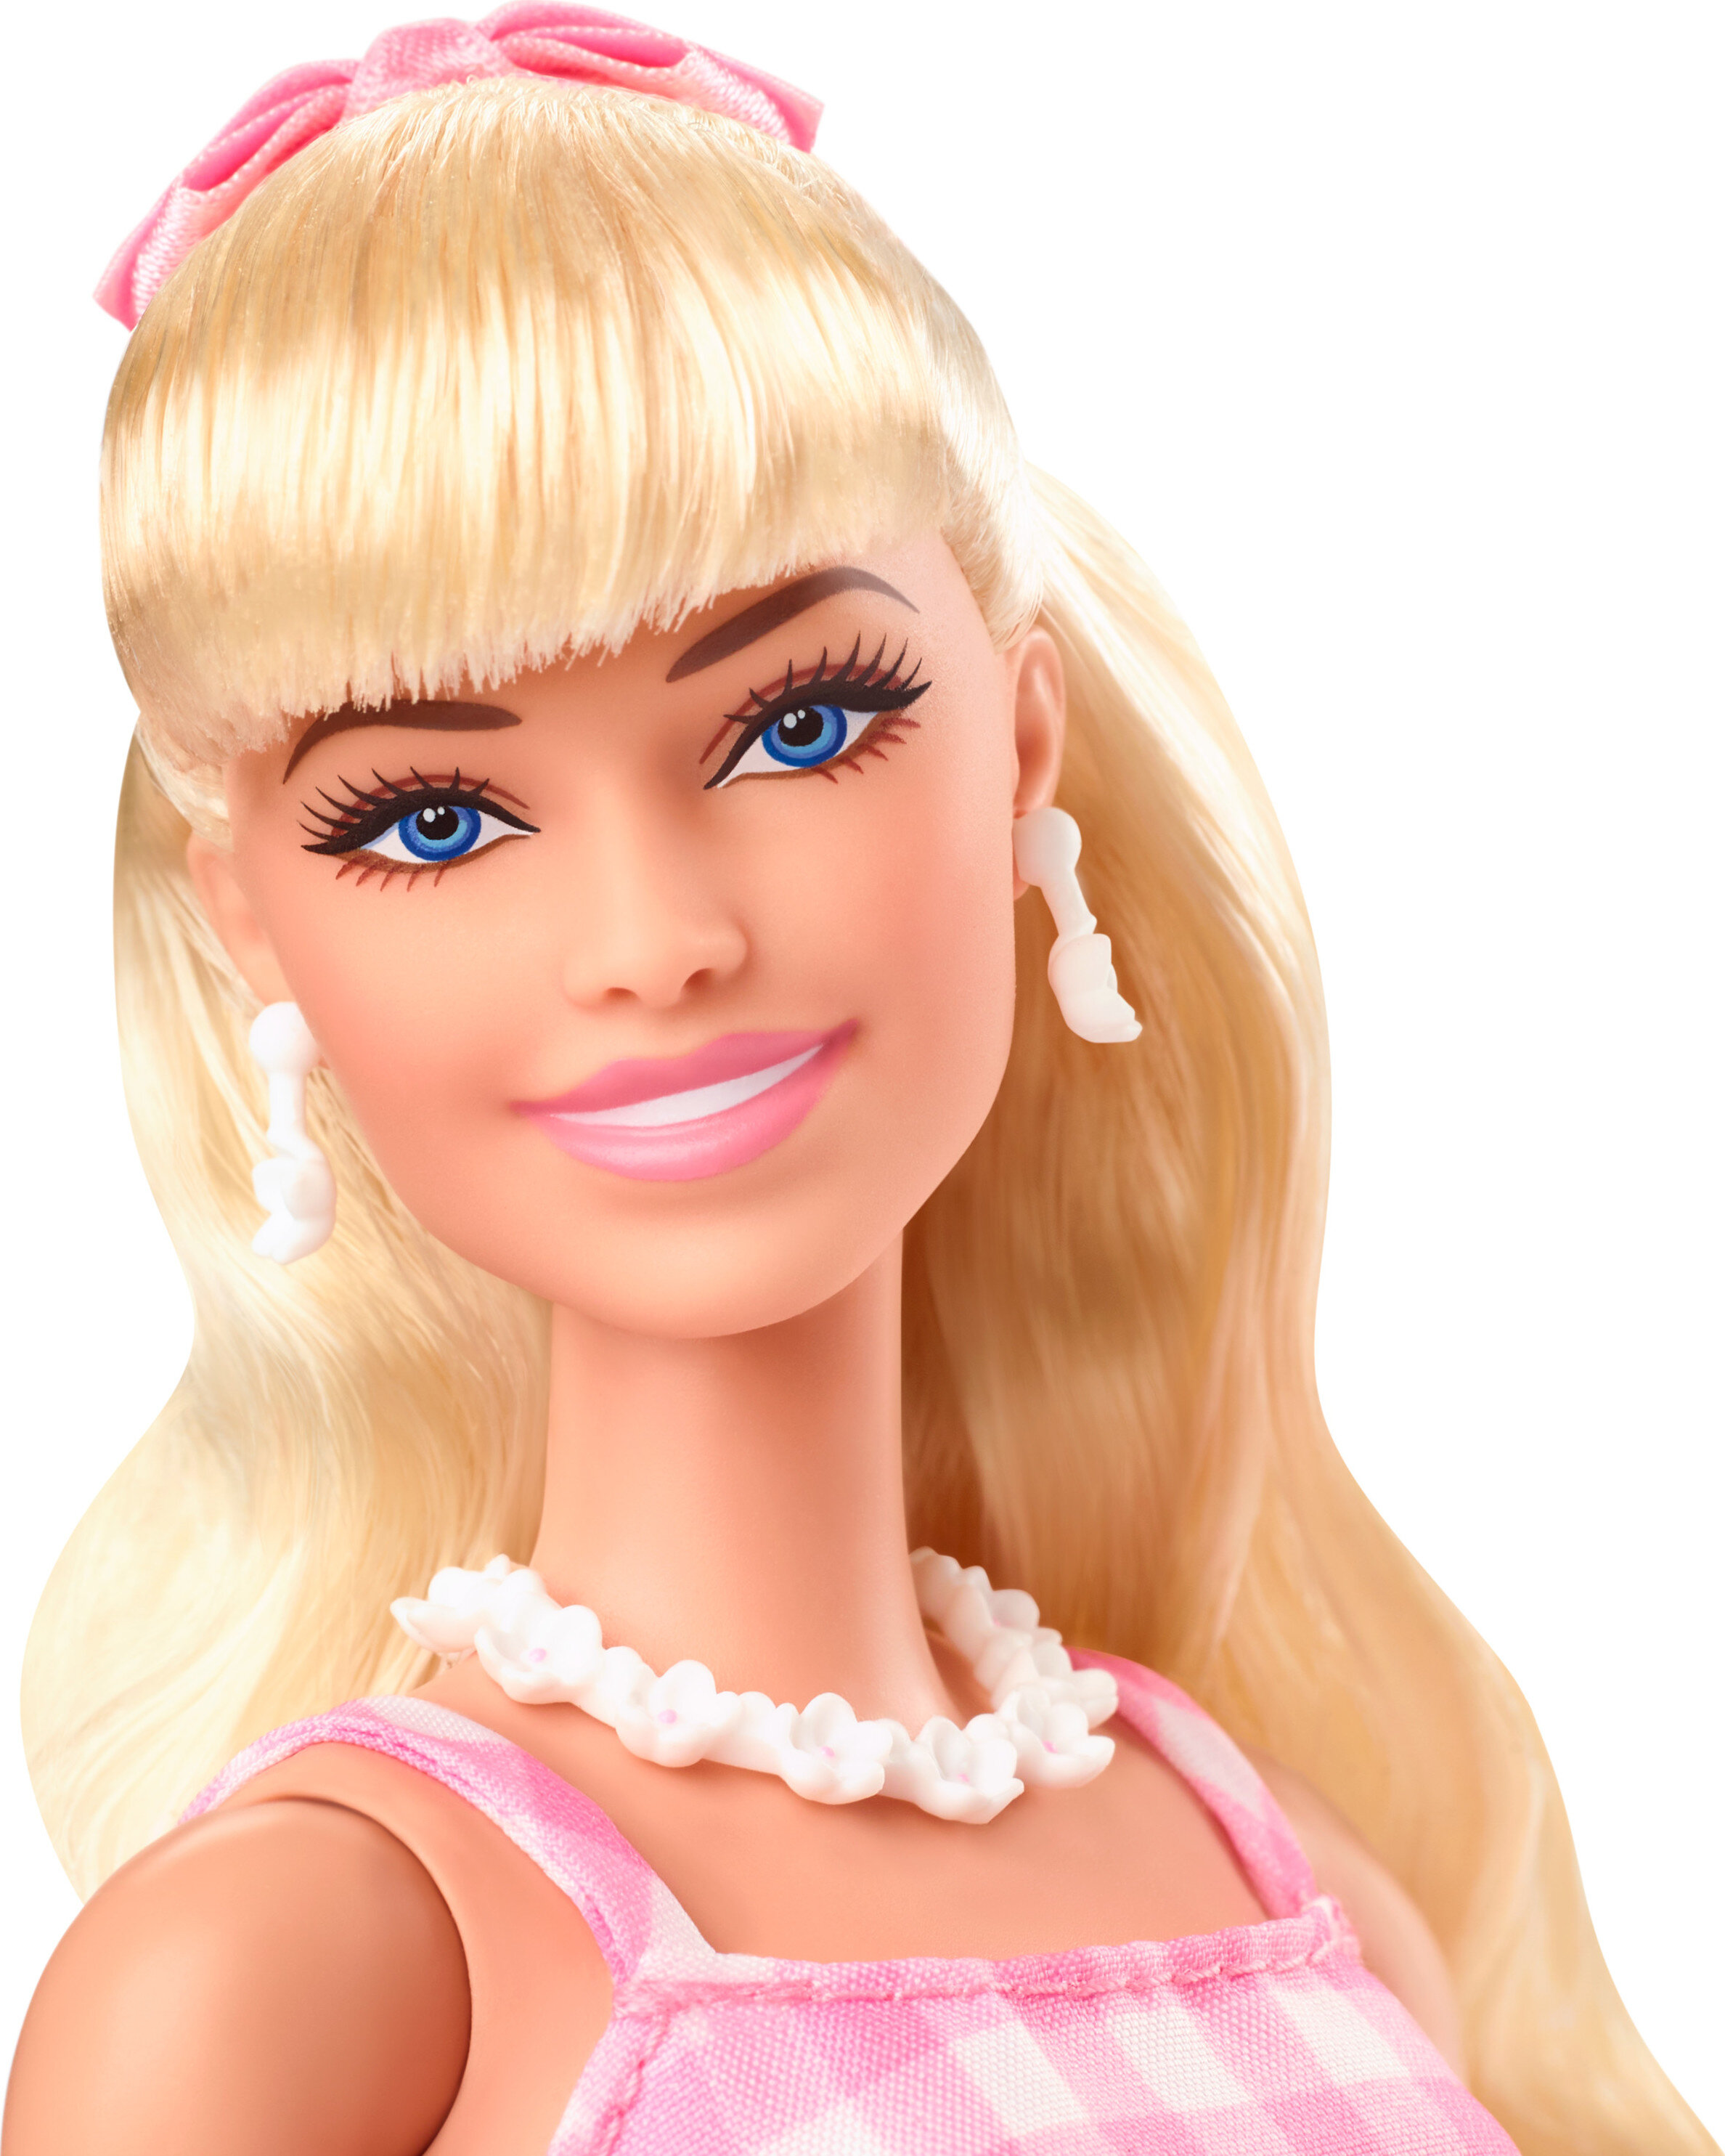 Barbie The Movie Collectible Doll, Margot Robbie as Barbie in Pink Gingham Dress, Toy for 3 Years and Up - image 5 of 8